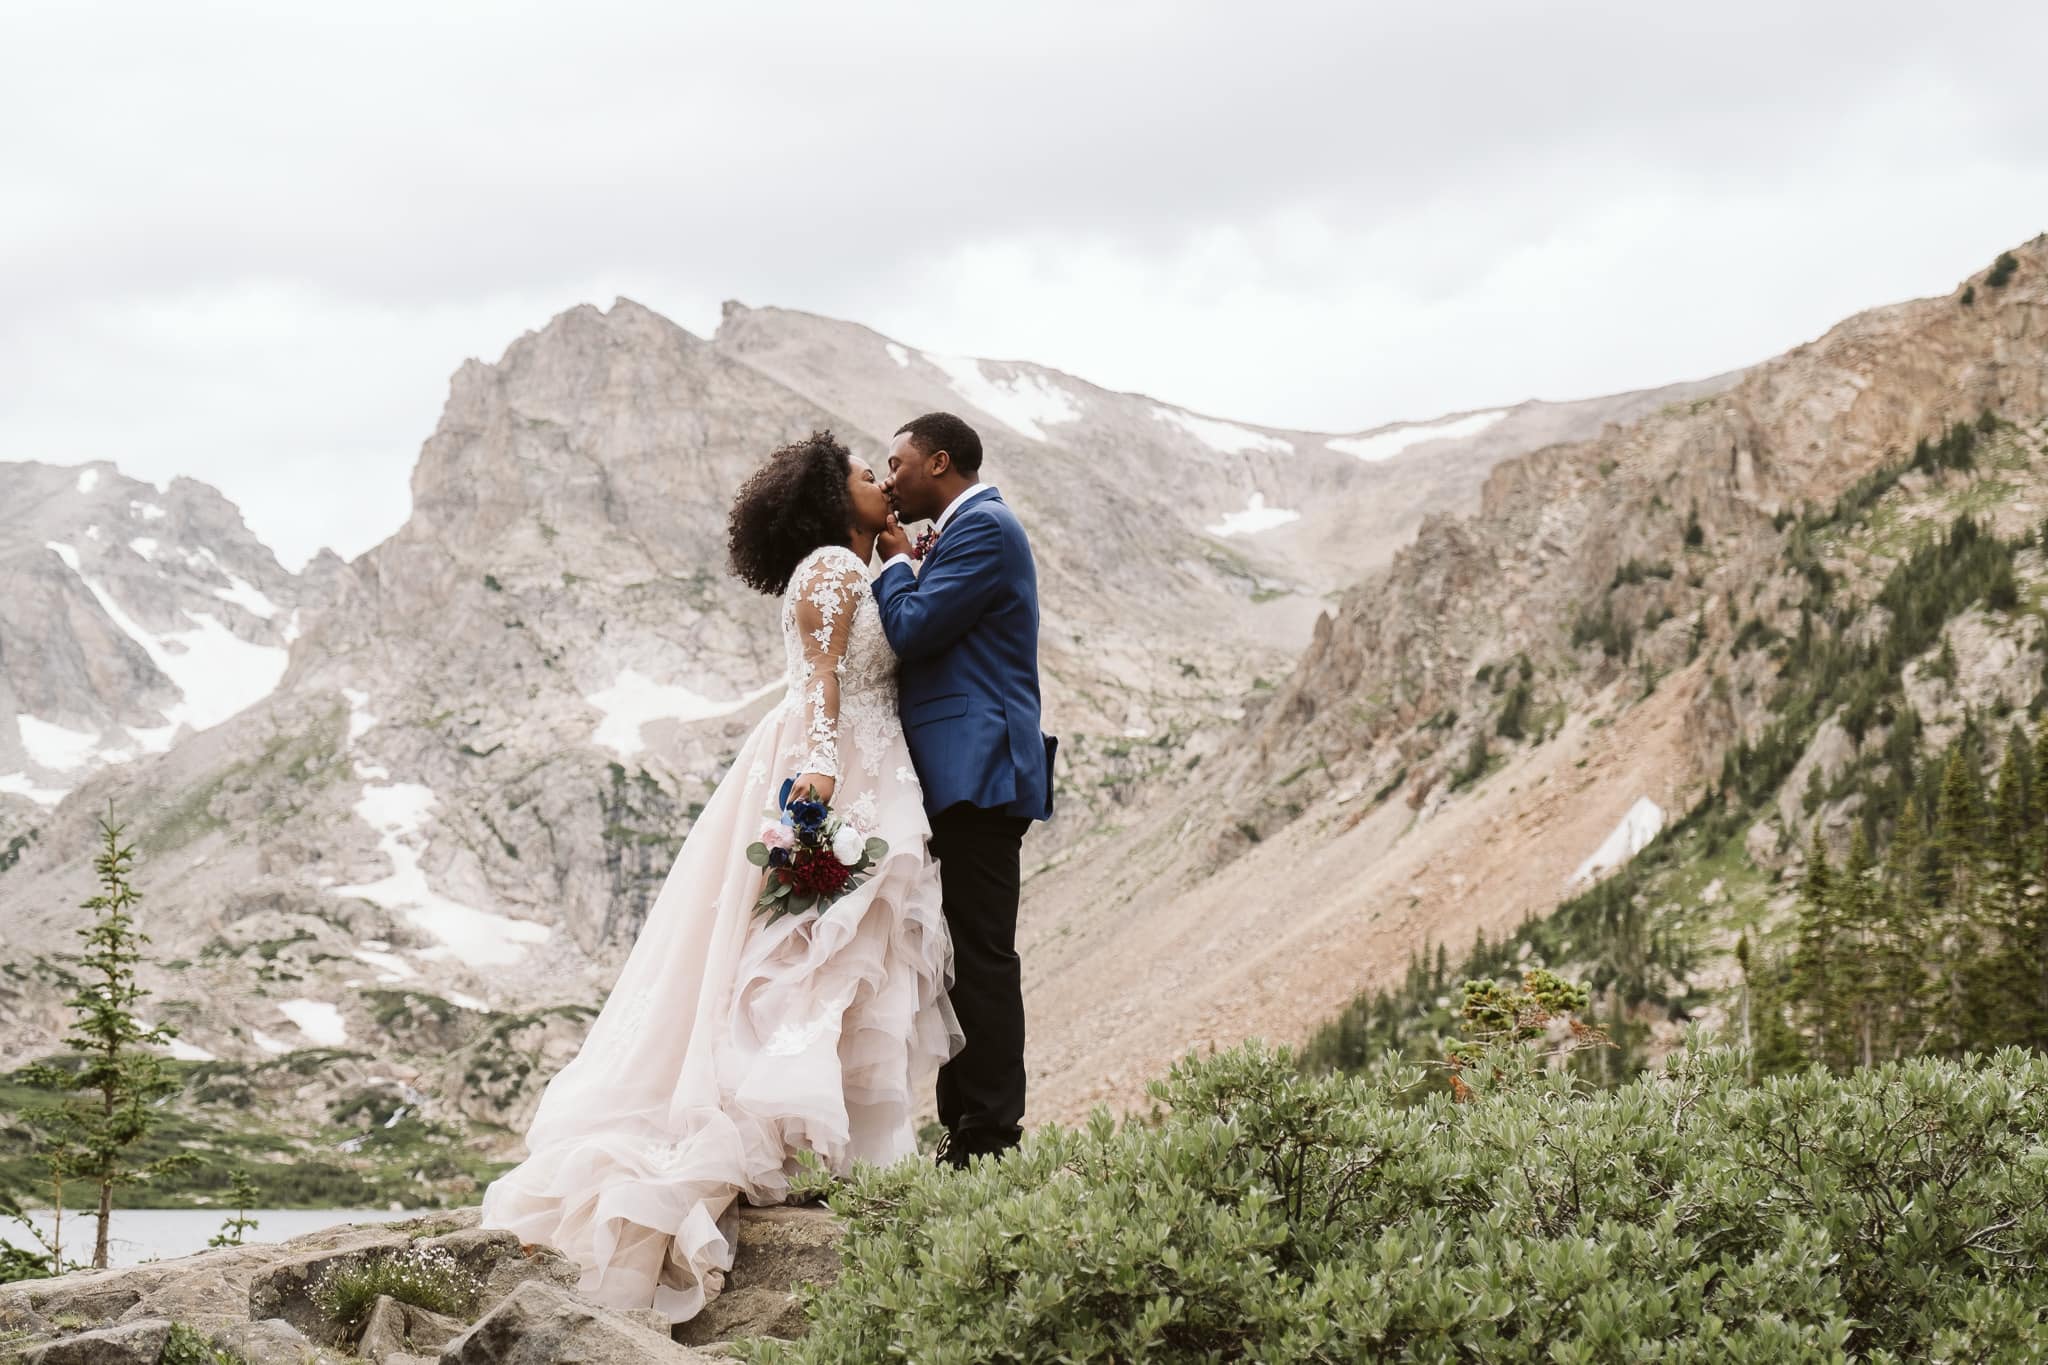 Best places to elope in the US